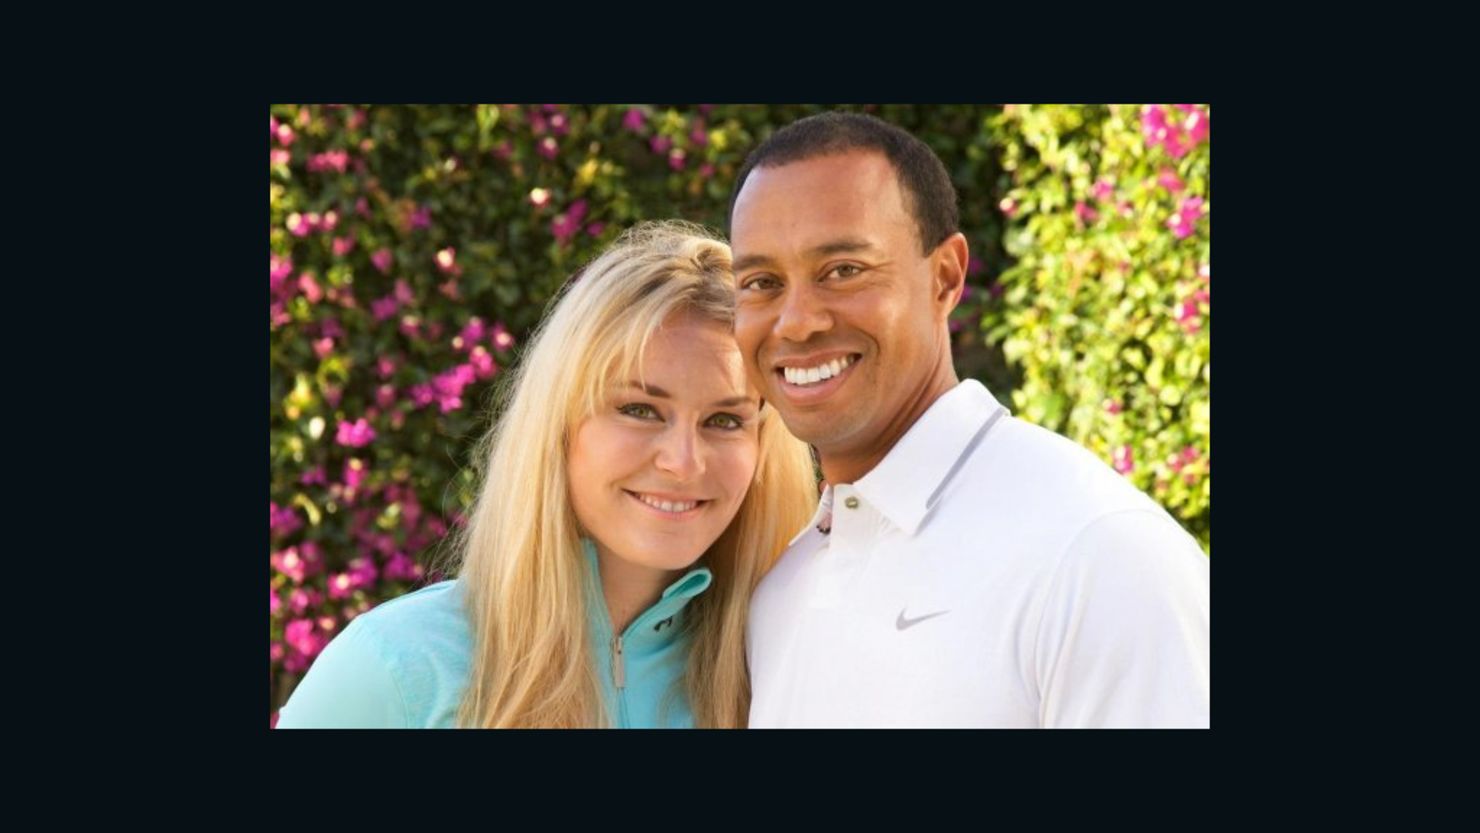 World champion skier Lindsey Vonn and 14-time major champion Tiger Woods have announced they are in a relationship.